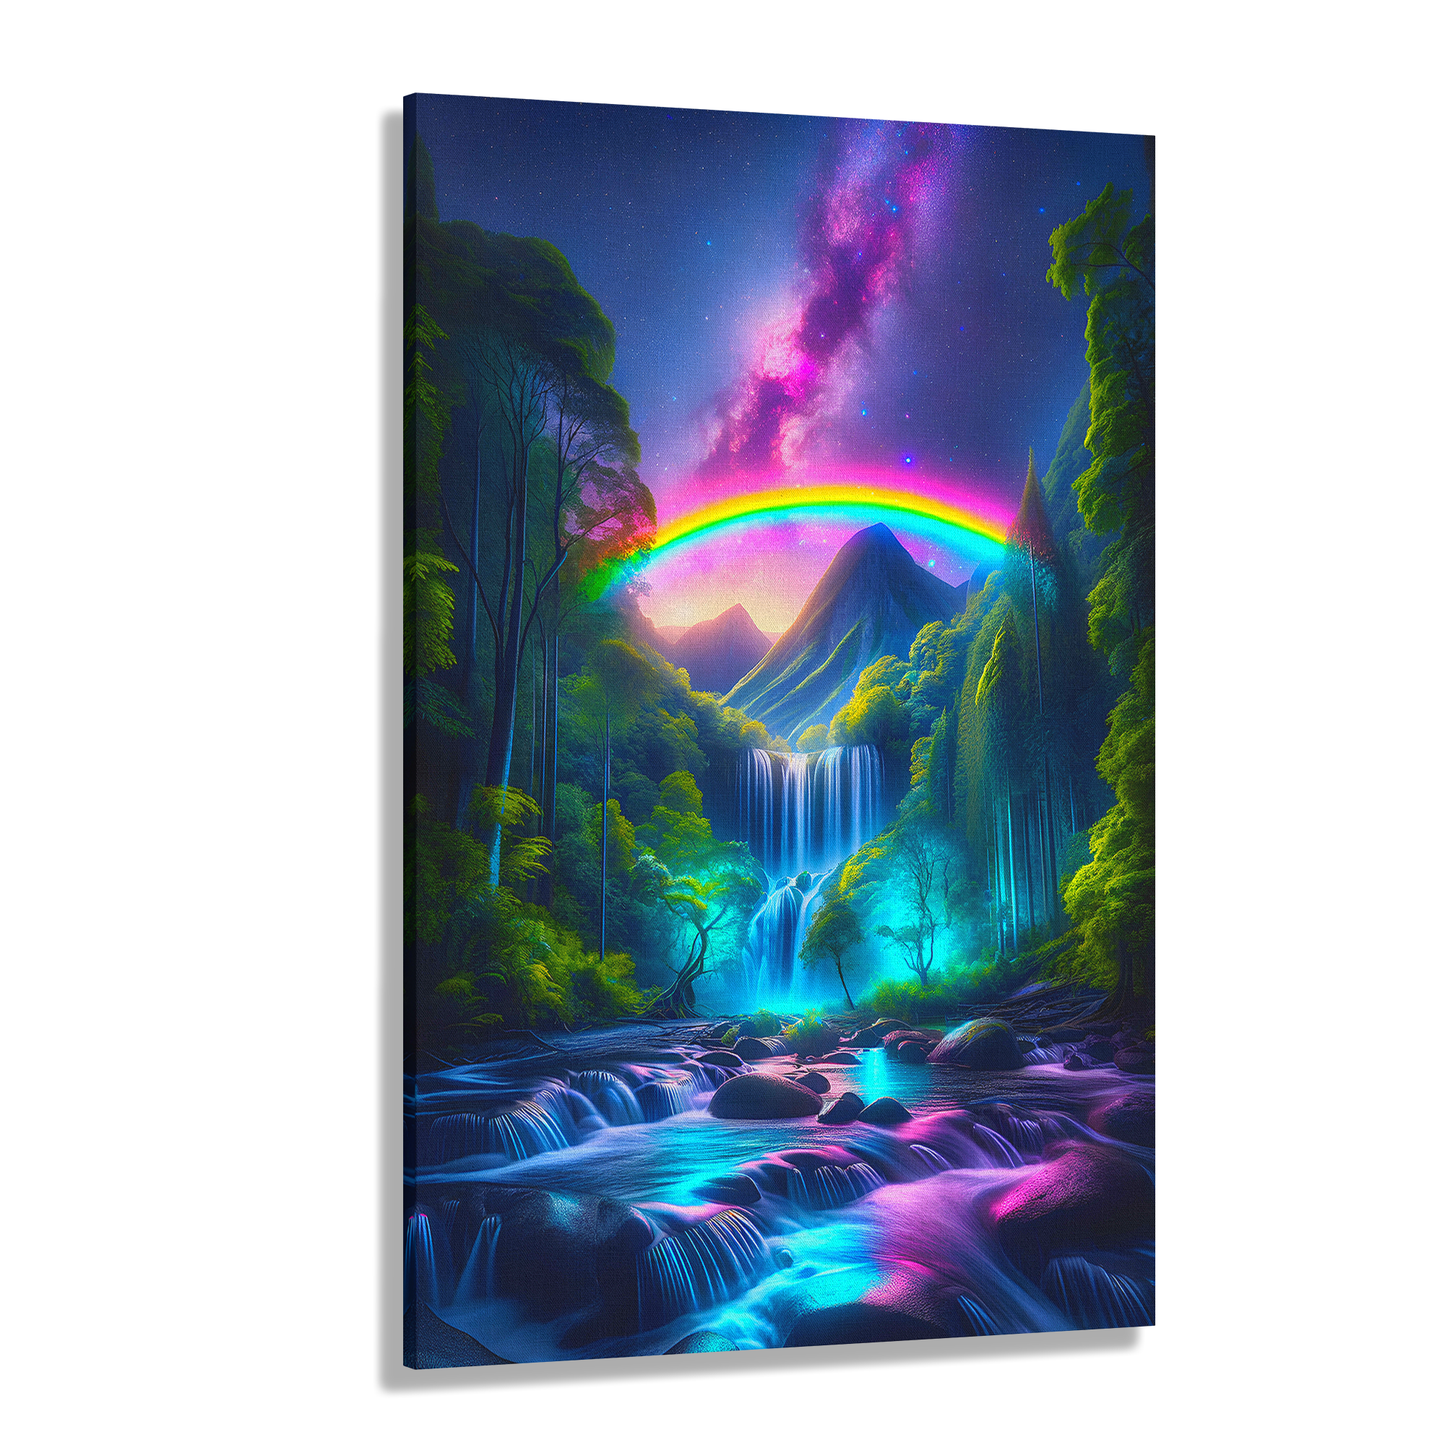 Galactic Falls (Canvas)Galactic Falls (Canvas  Matte finish, stretched, with a depth of 1.25 inches)
Make an art statement with RimaGallery's responsibly made canvases. Eco-friendly cottonRimaGallery